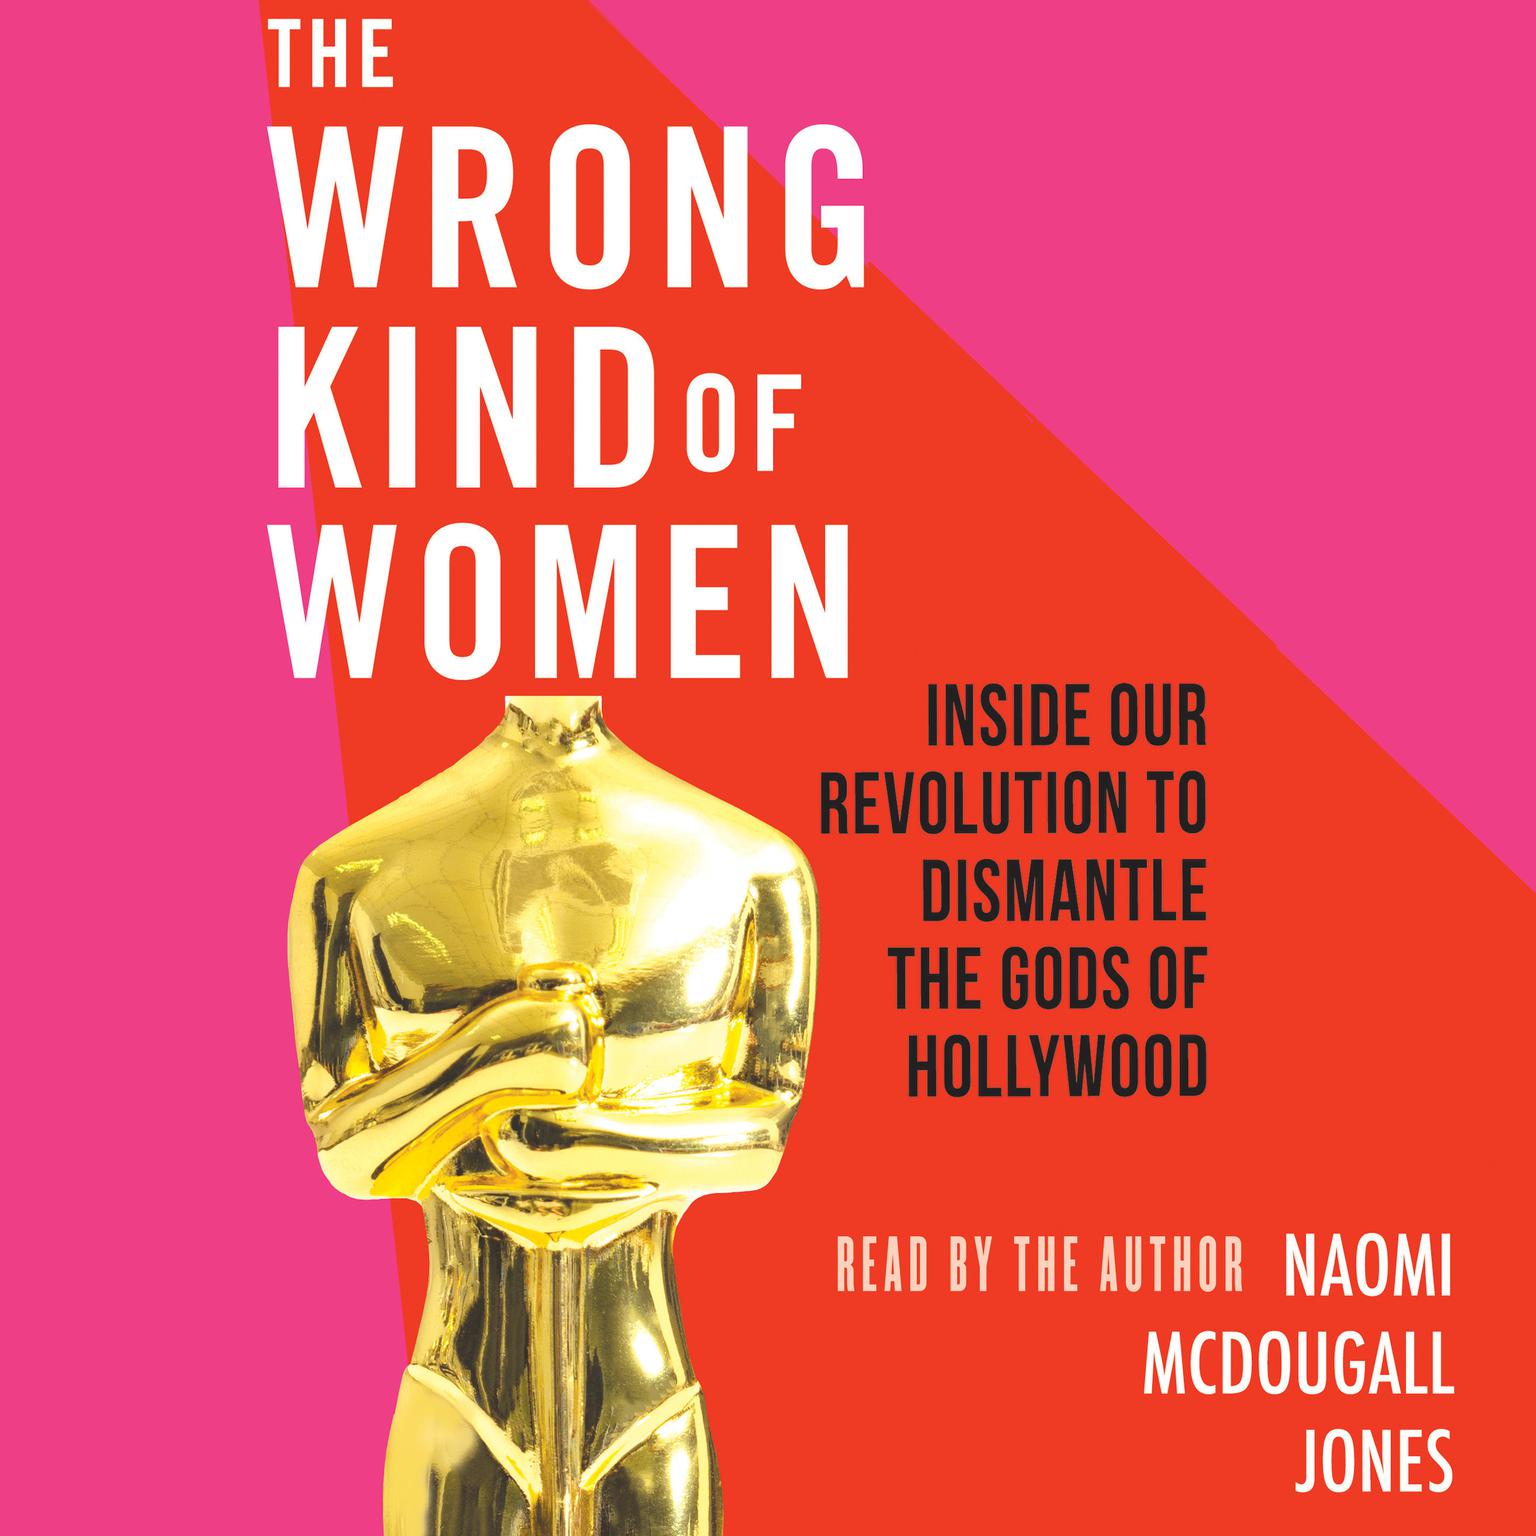 The Wrong Kind of Women: Inside Our Revolution to Dismantle the Gods of Hollywood Audiobook, by Naomi McDougall Jones